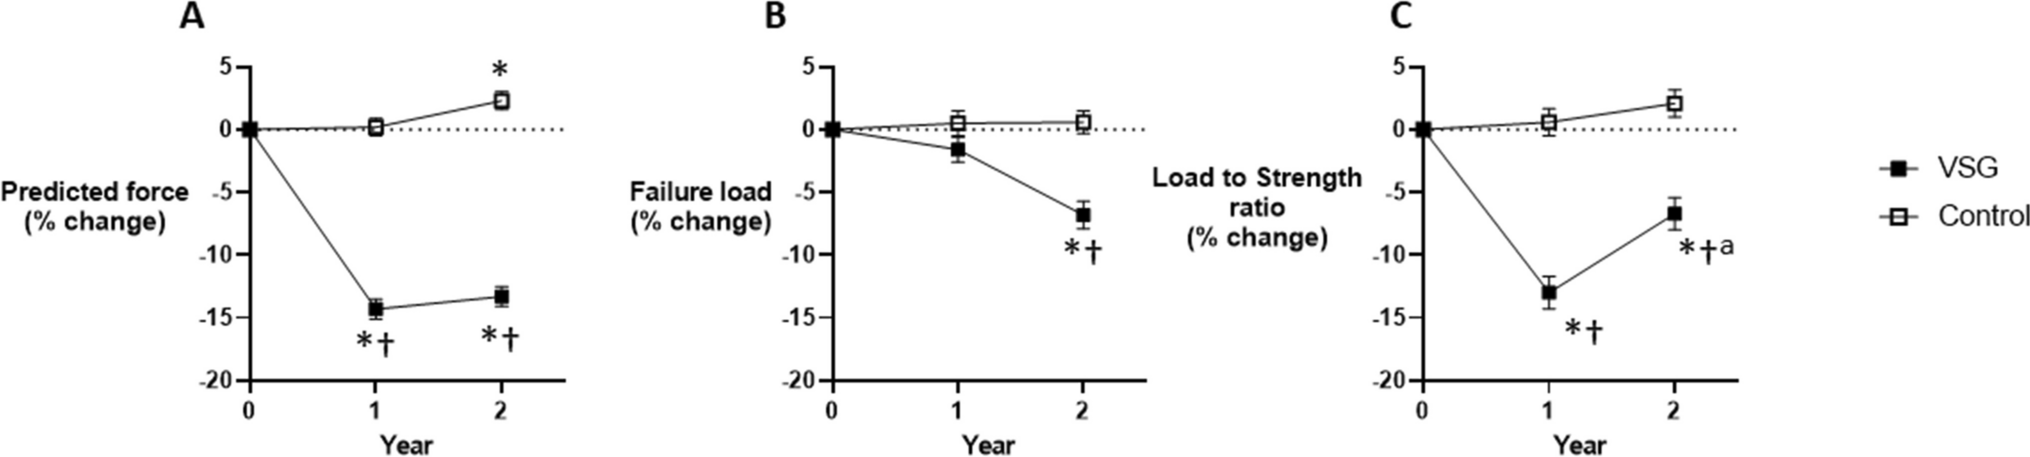 Risk of wrist fracture, estimated by the load-to-strength ratio, declines following sleeve gastrectomy in adolescents and young adults